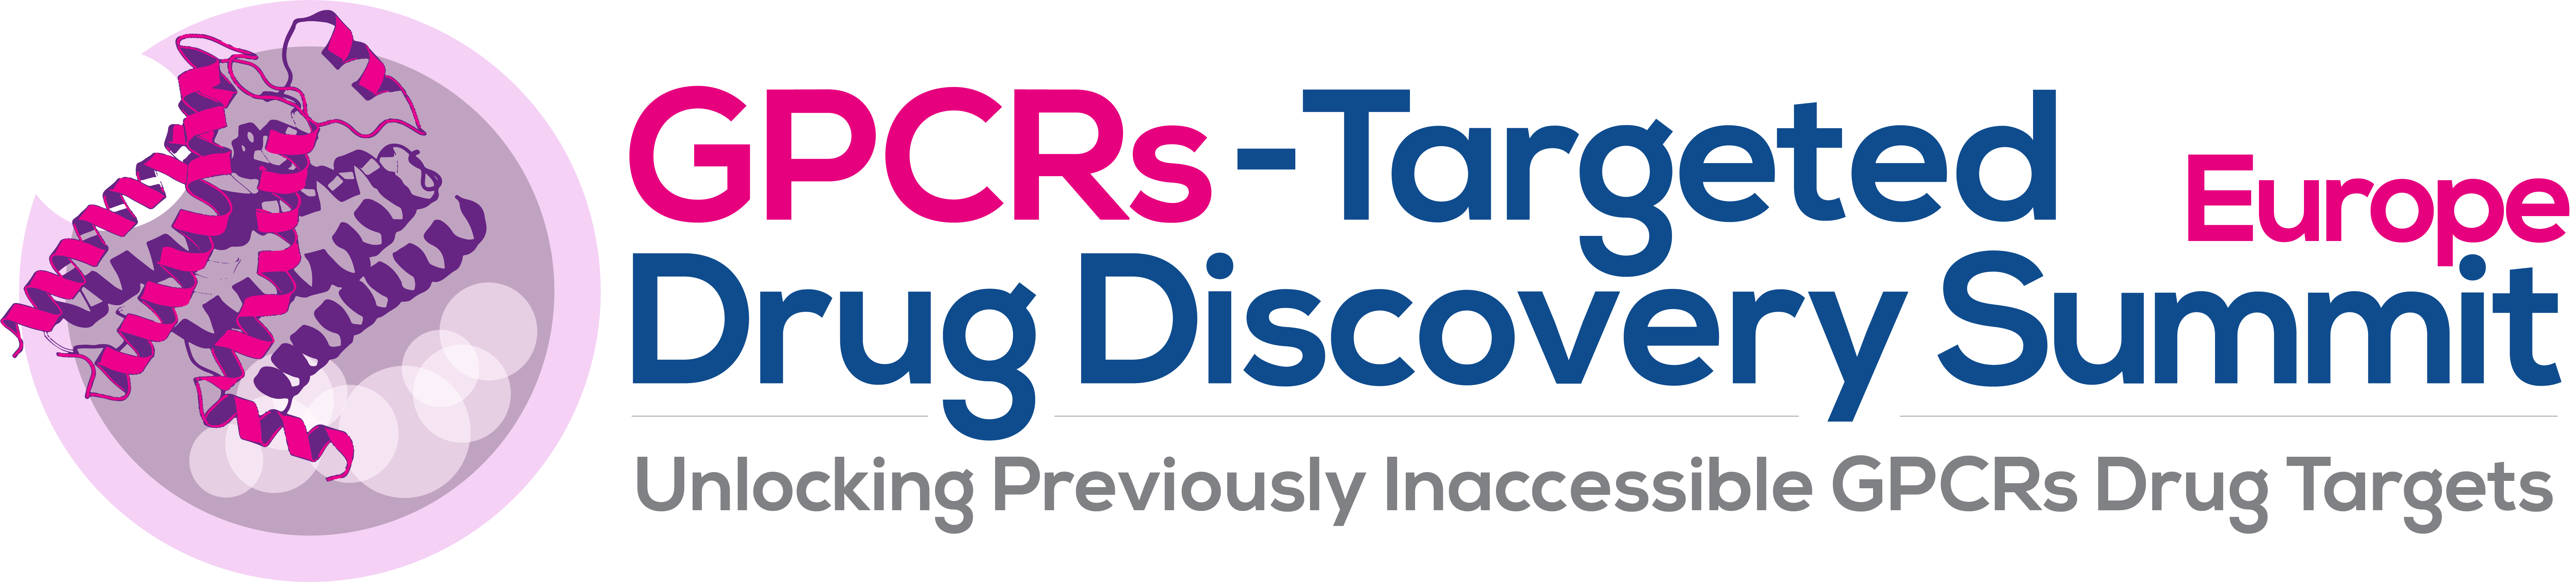 HW240707 49702 GPCRs-Targeted Drug Discovery Summit Europe l